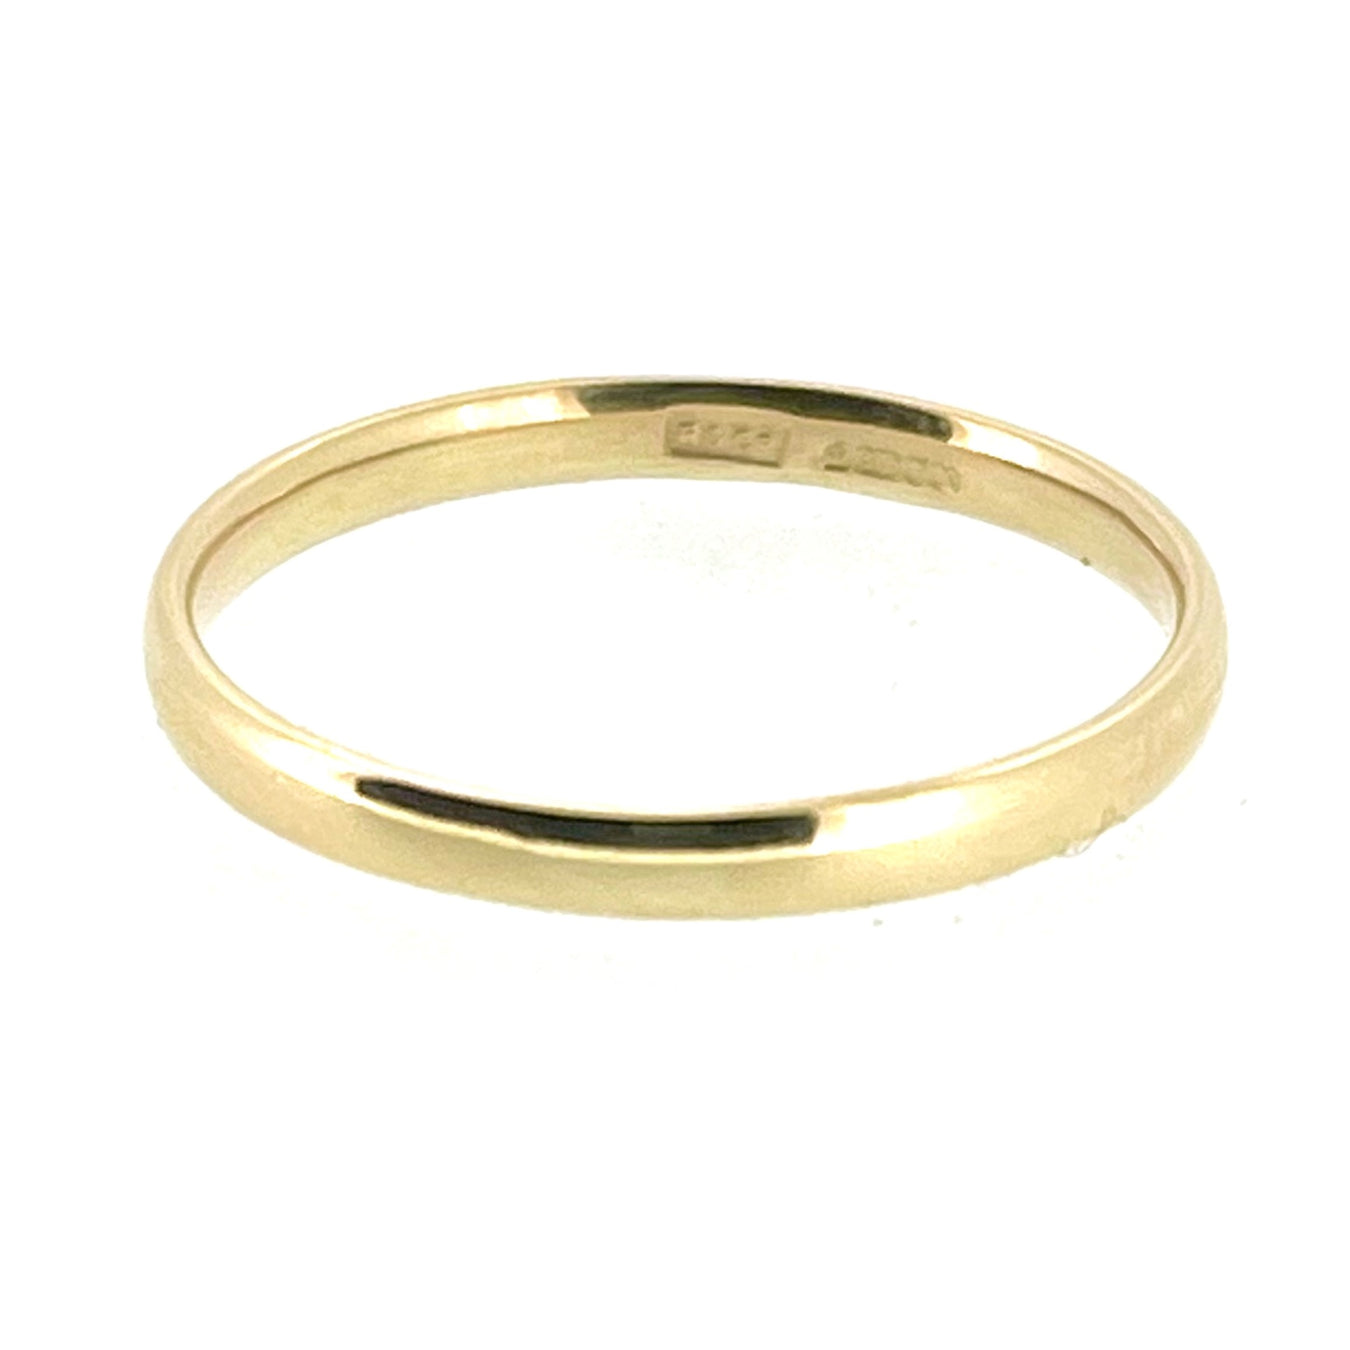 Exquisite 9ct yellow gold ring from the Roberts & Co Collection